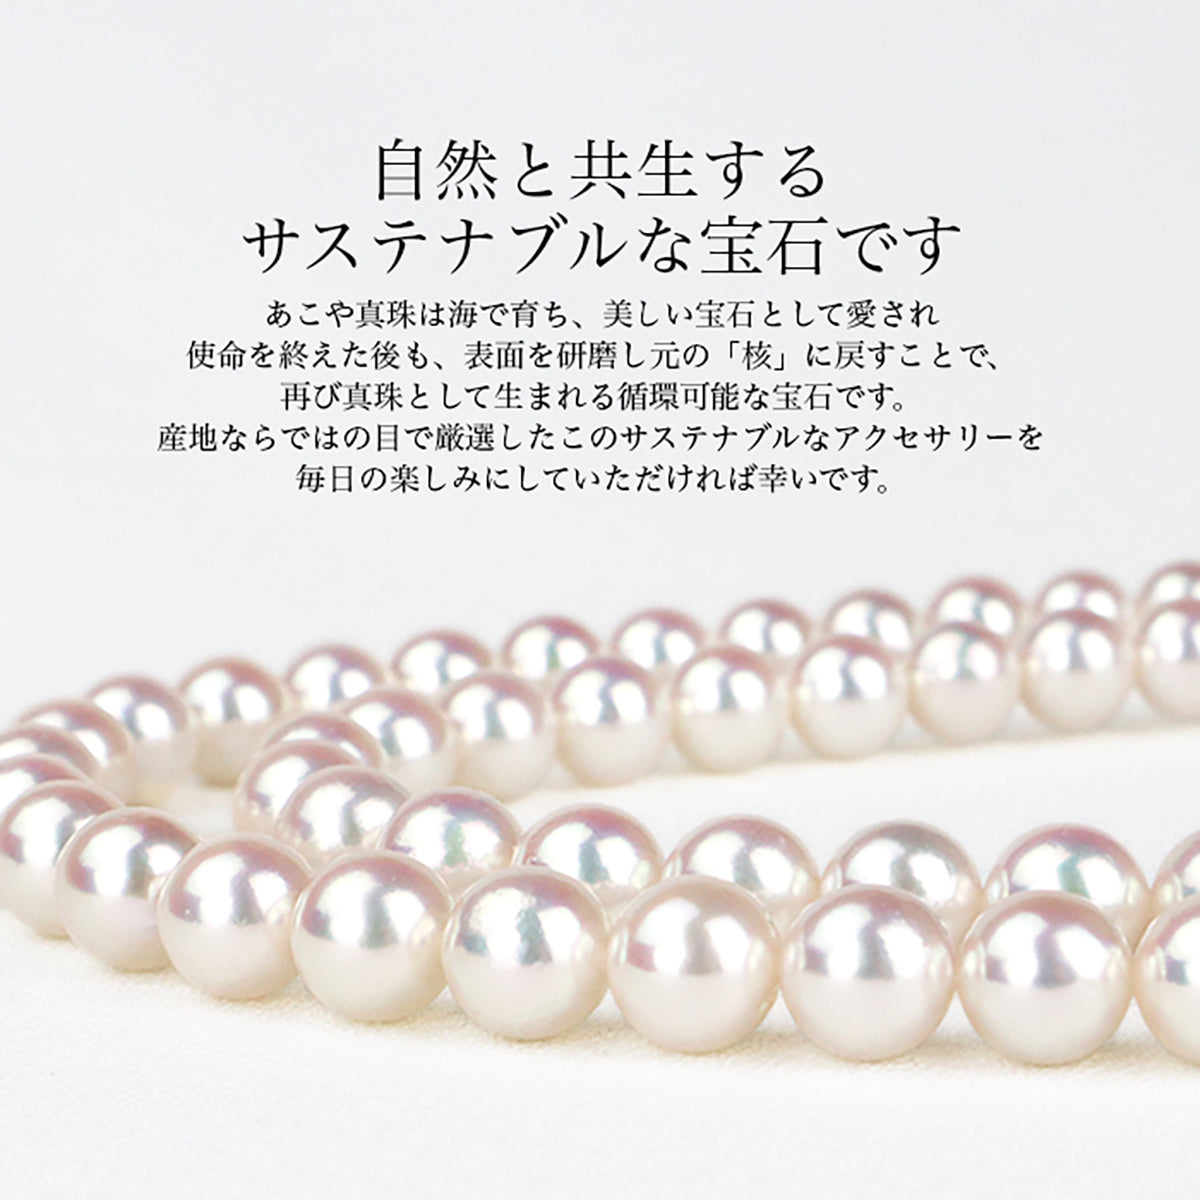 Akoya Pearl Station Necklace [4 types of pearl colors] 7 beads 8.0-9.0mm SV925 Venetian chain with cardboard case (4055)